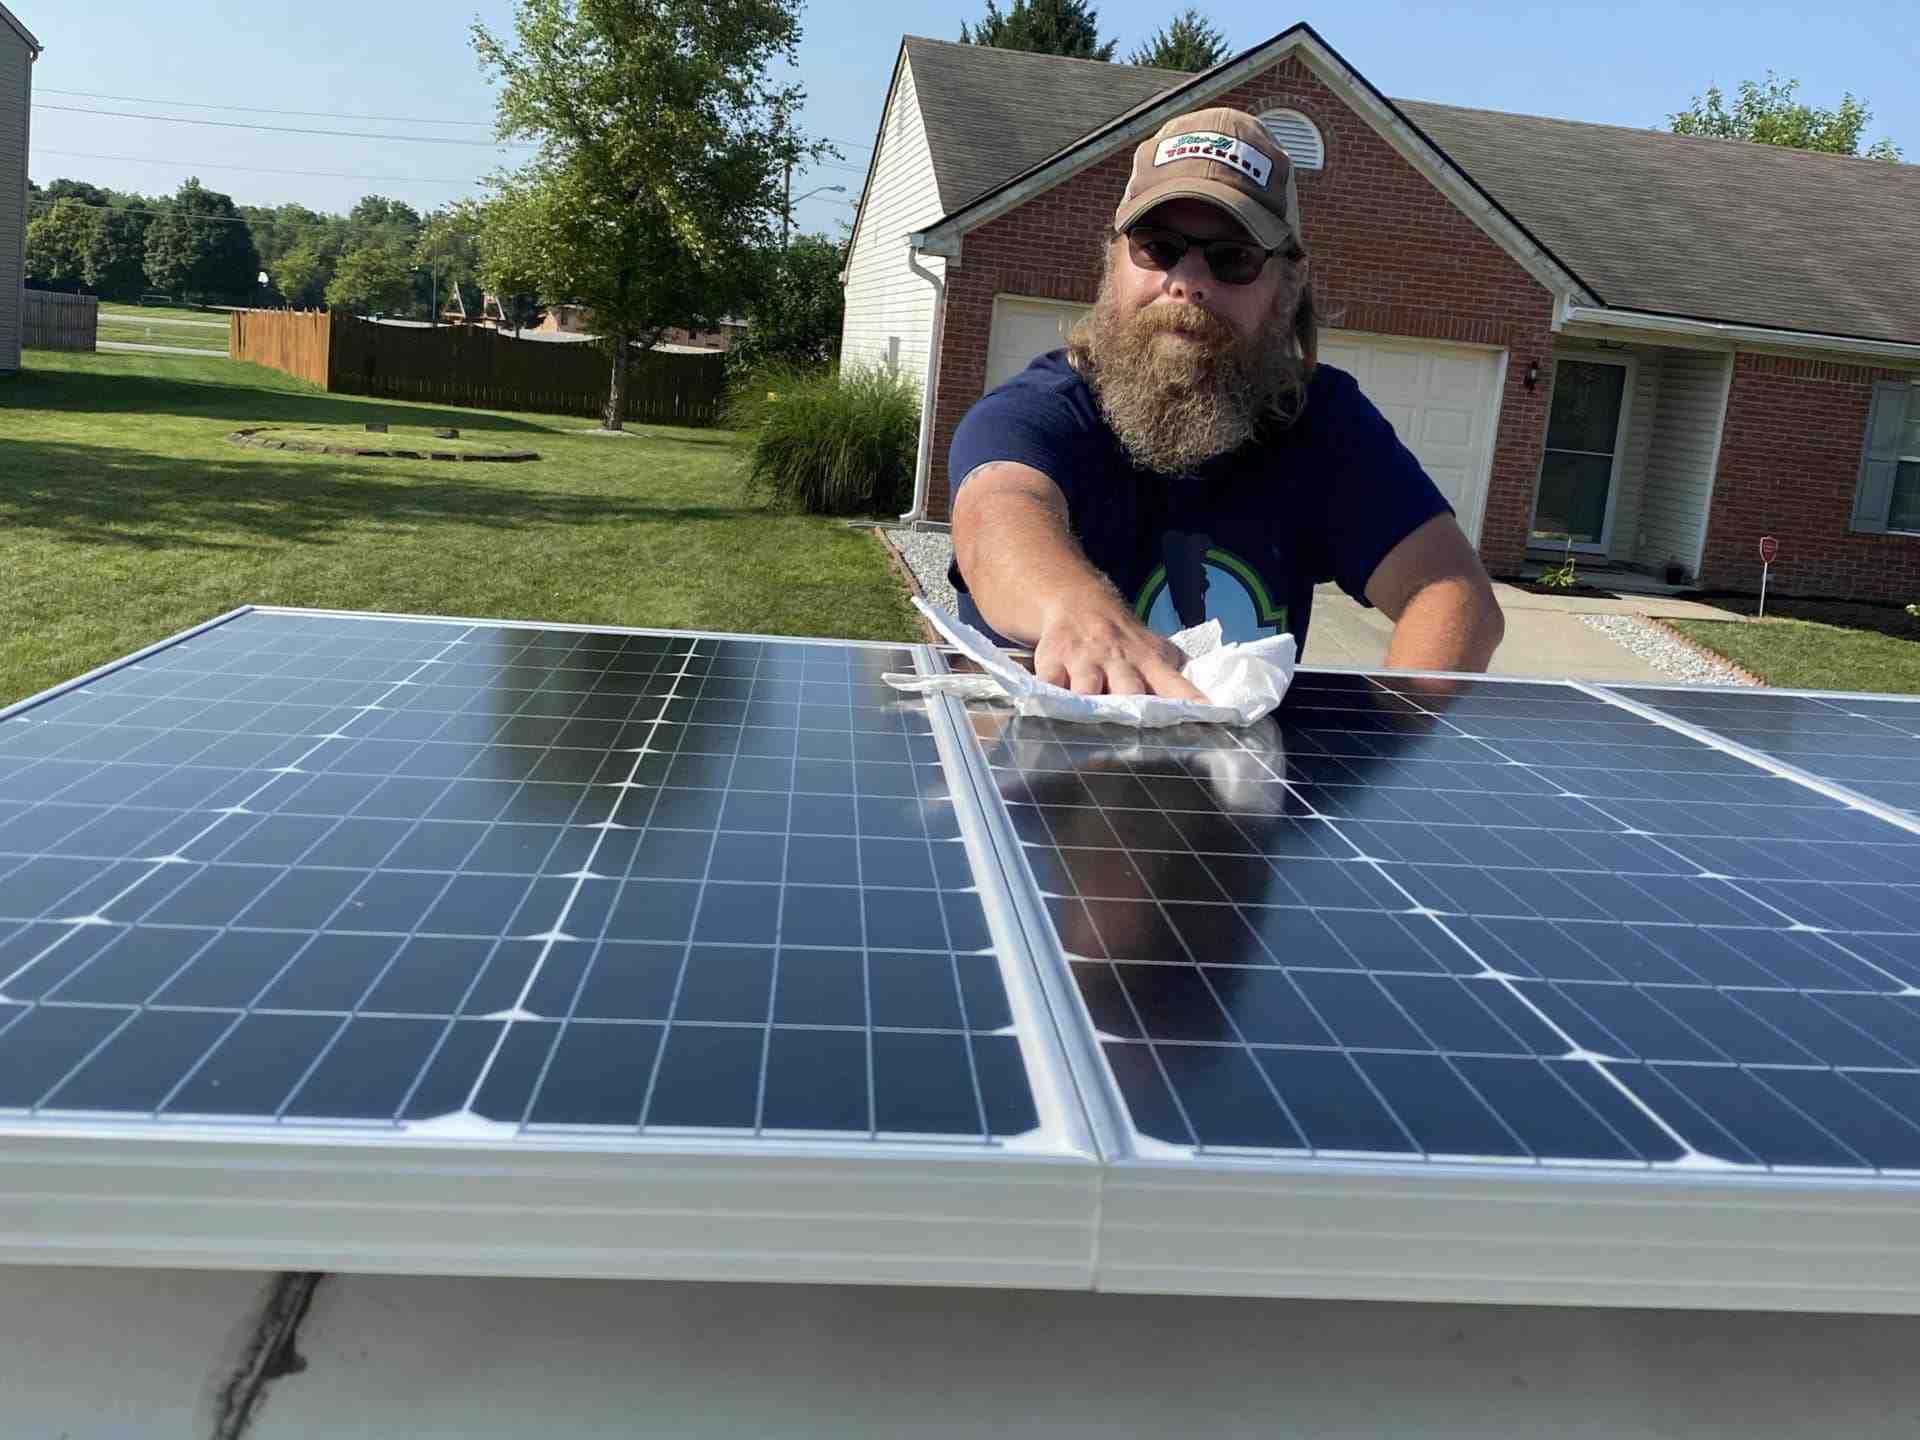 How do you attach solar panels to roof?